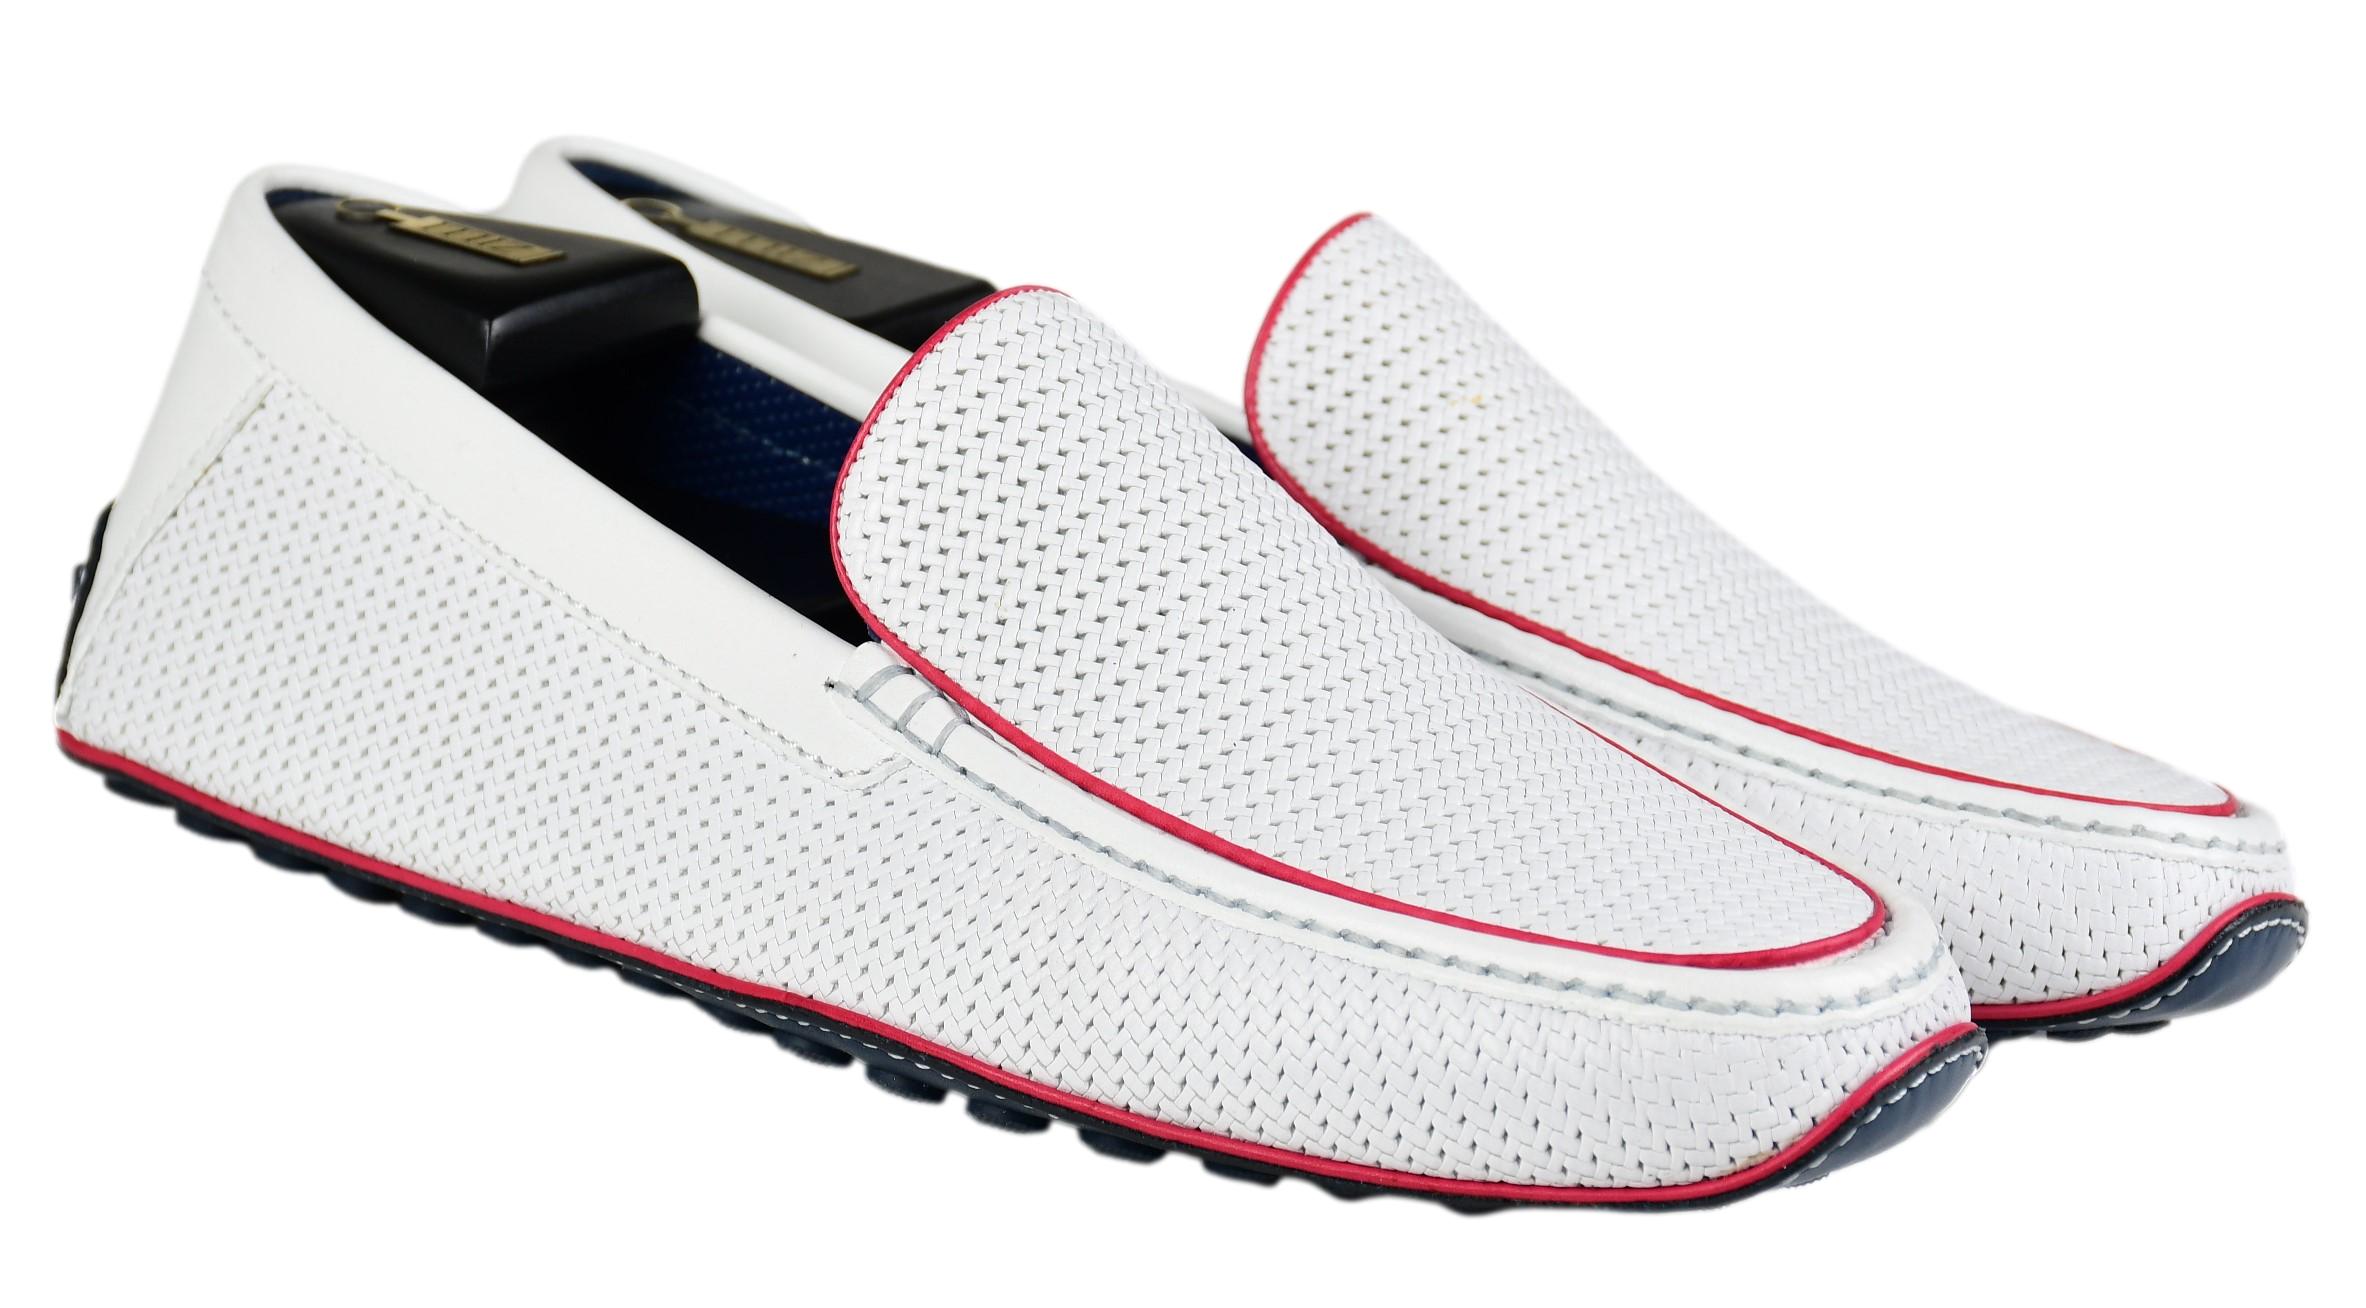 LOUIS VUITTON SHOES S-LOCK DRIVING LOAFERS 35.5 WHITE LEATHER SHOES  ref.328881 - Joli Closet